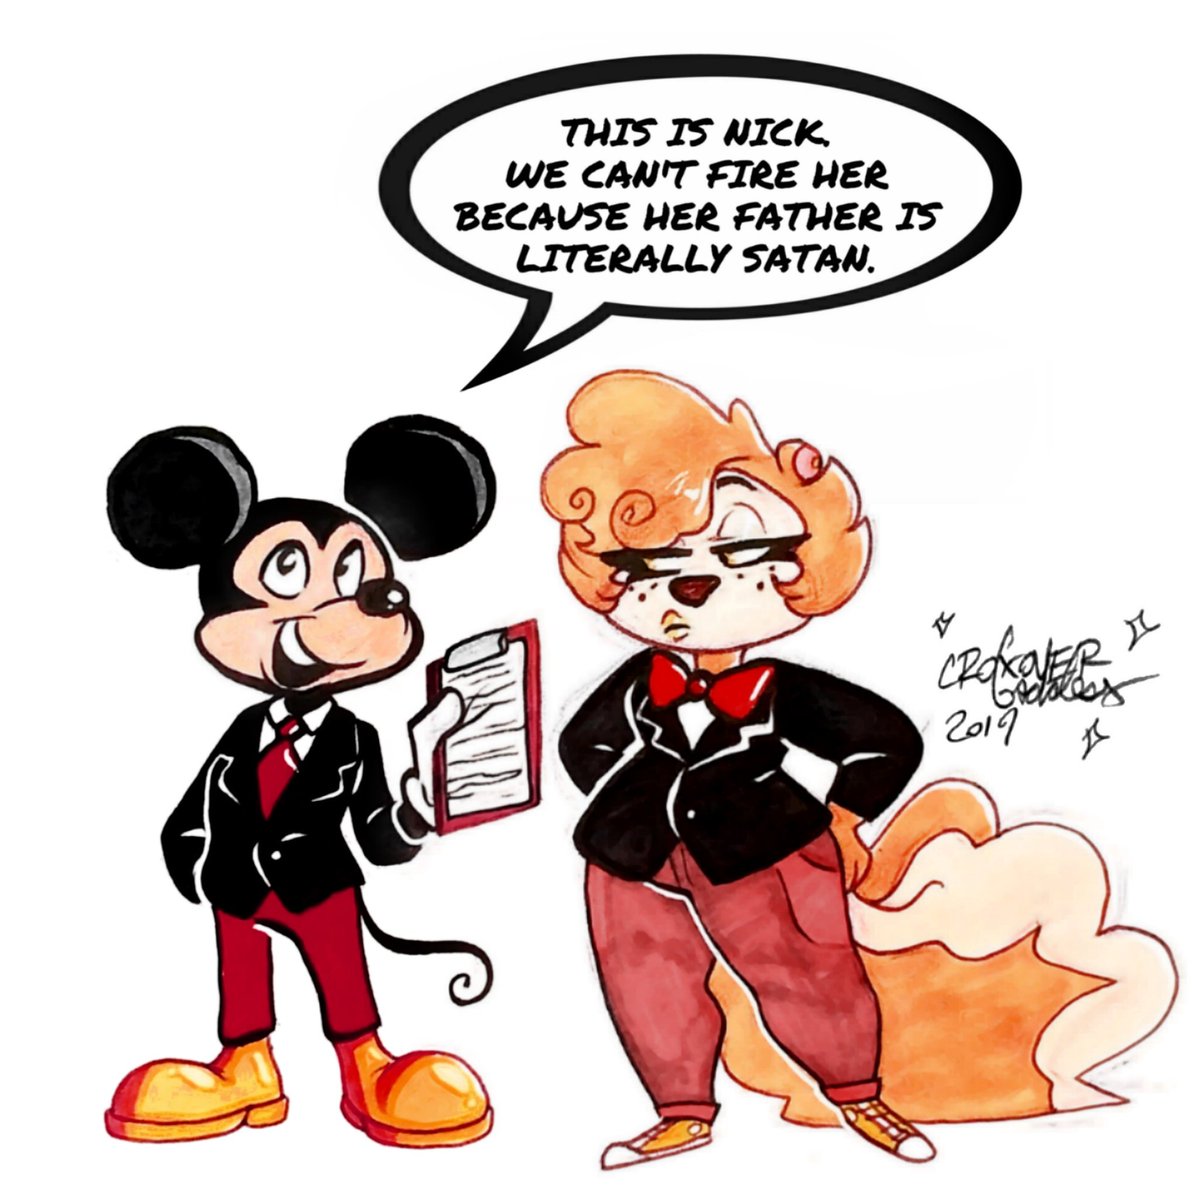 I missed Nick's House of Mouse job

I'm having too much fun editing on my phone
#originalcharacters #artistsontwitter #Disney 